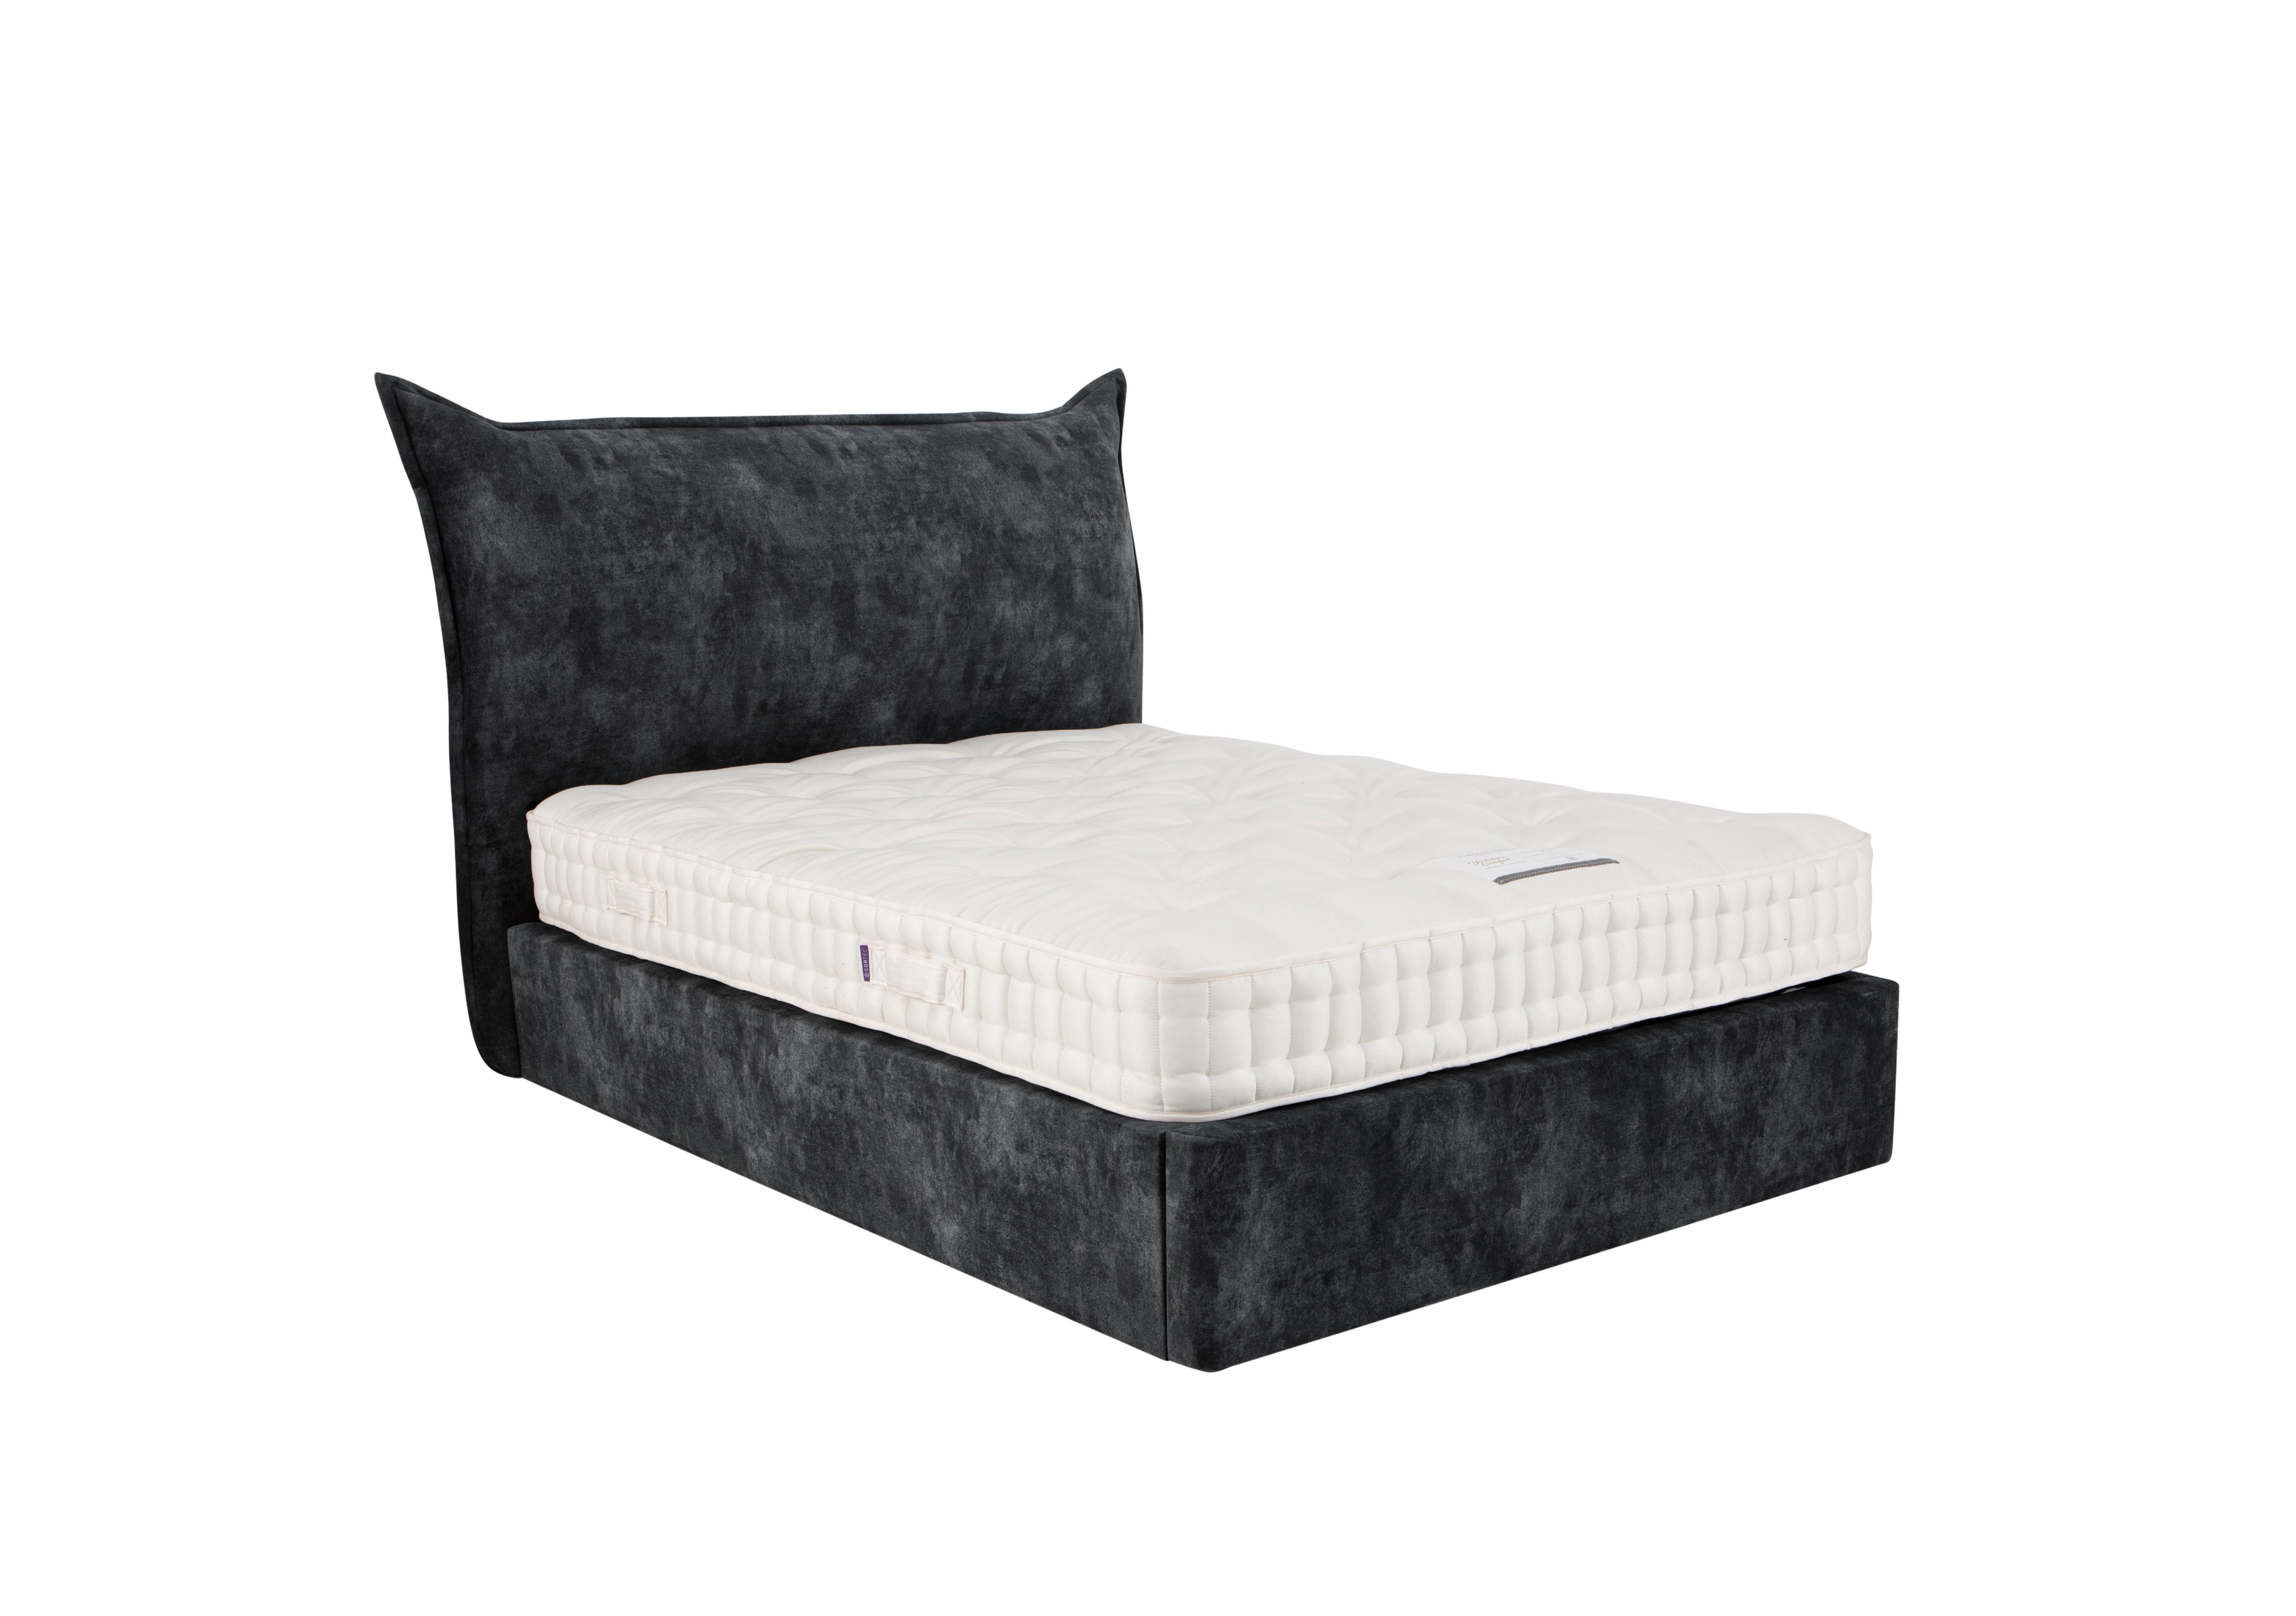 Lunar Electric Ottoman Bed Frame in Infinity Anthracite on Furniture Village